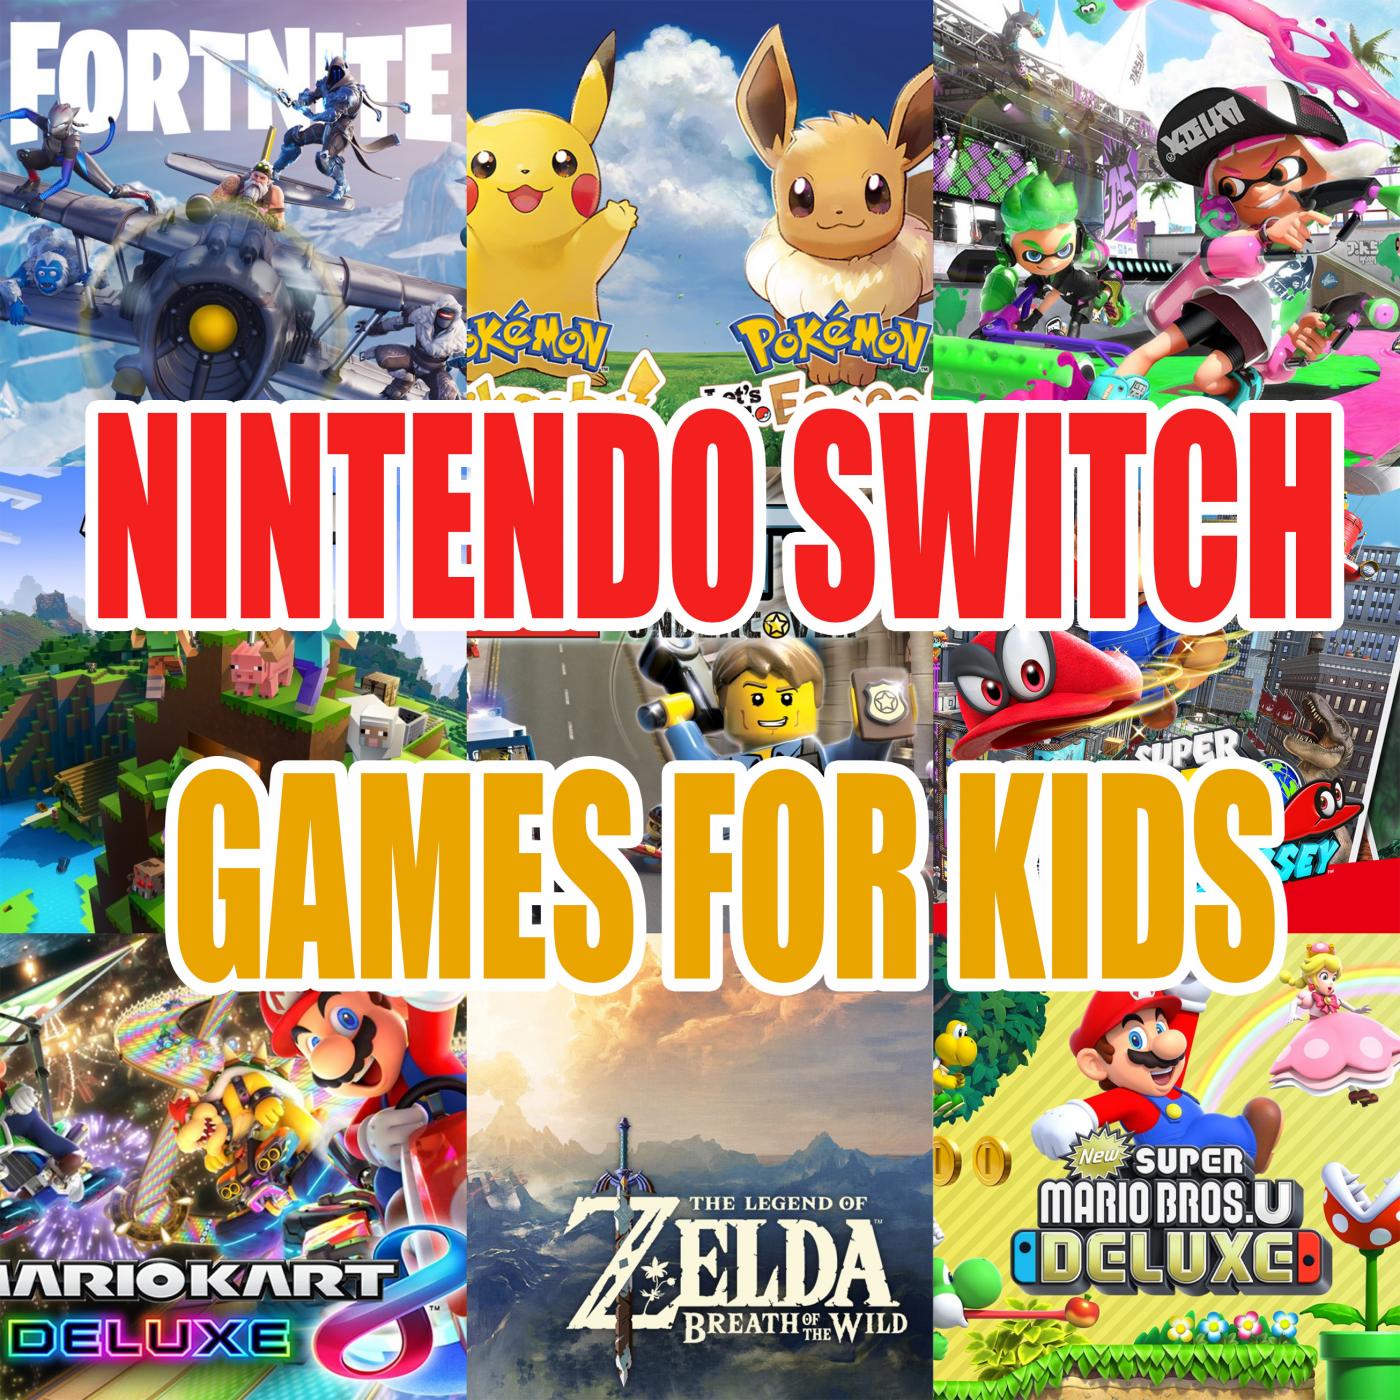 What are the best Nintendo Switch games for younger children?